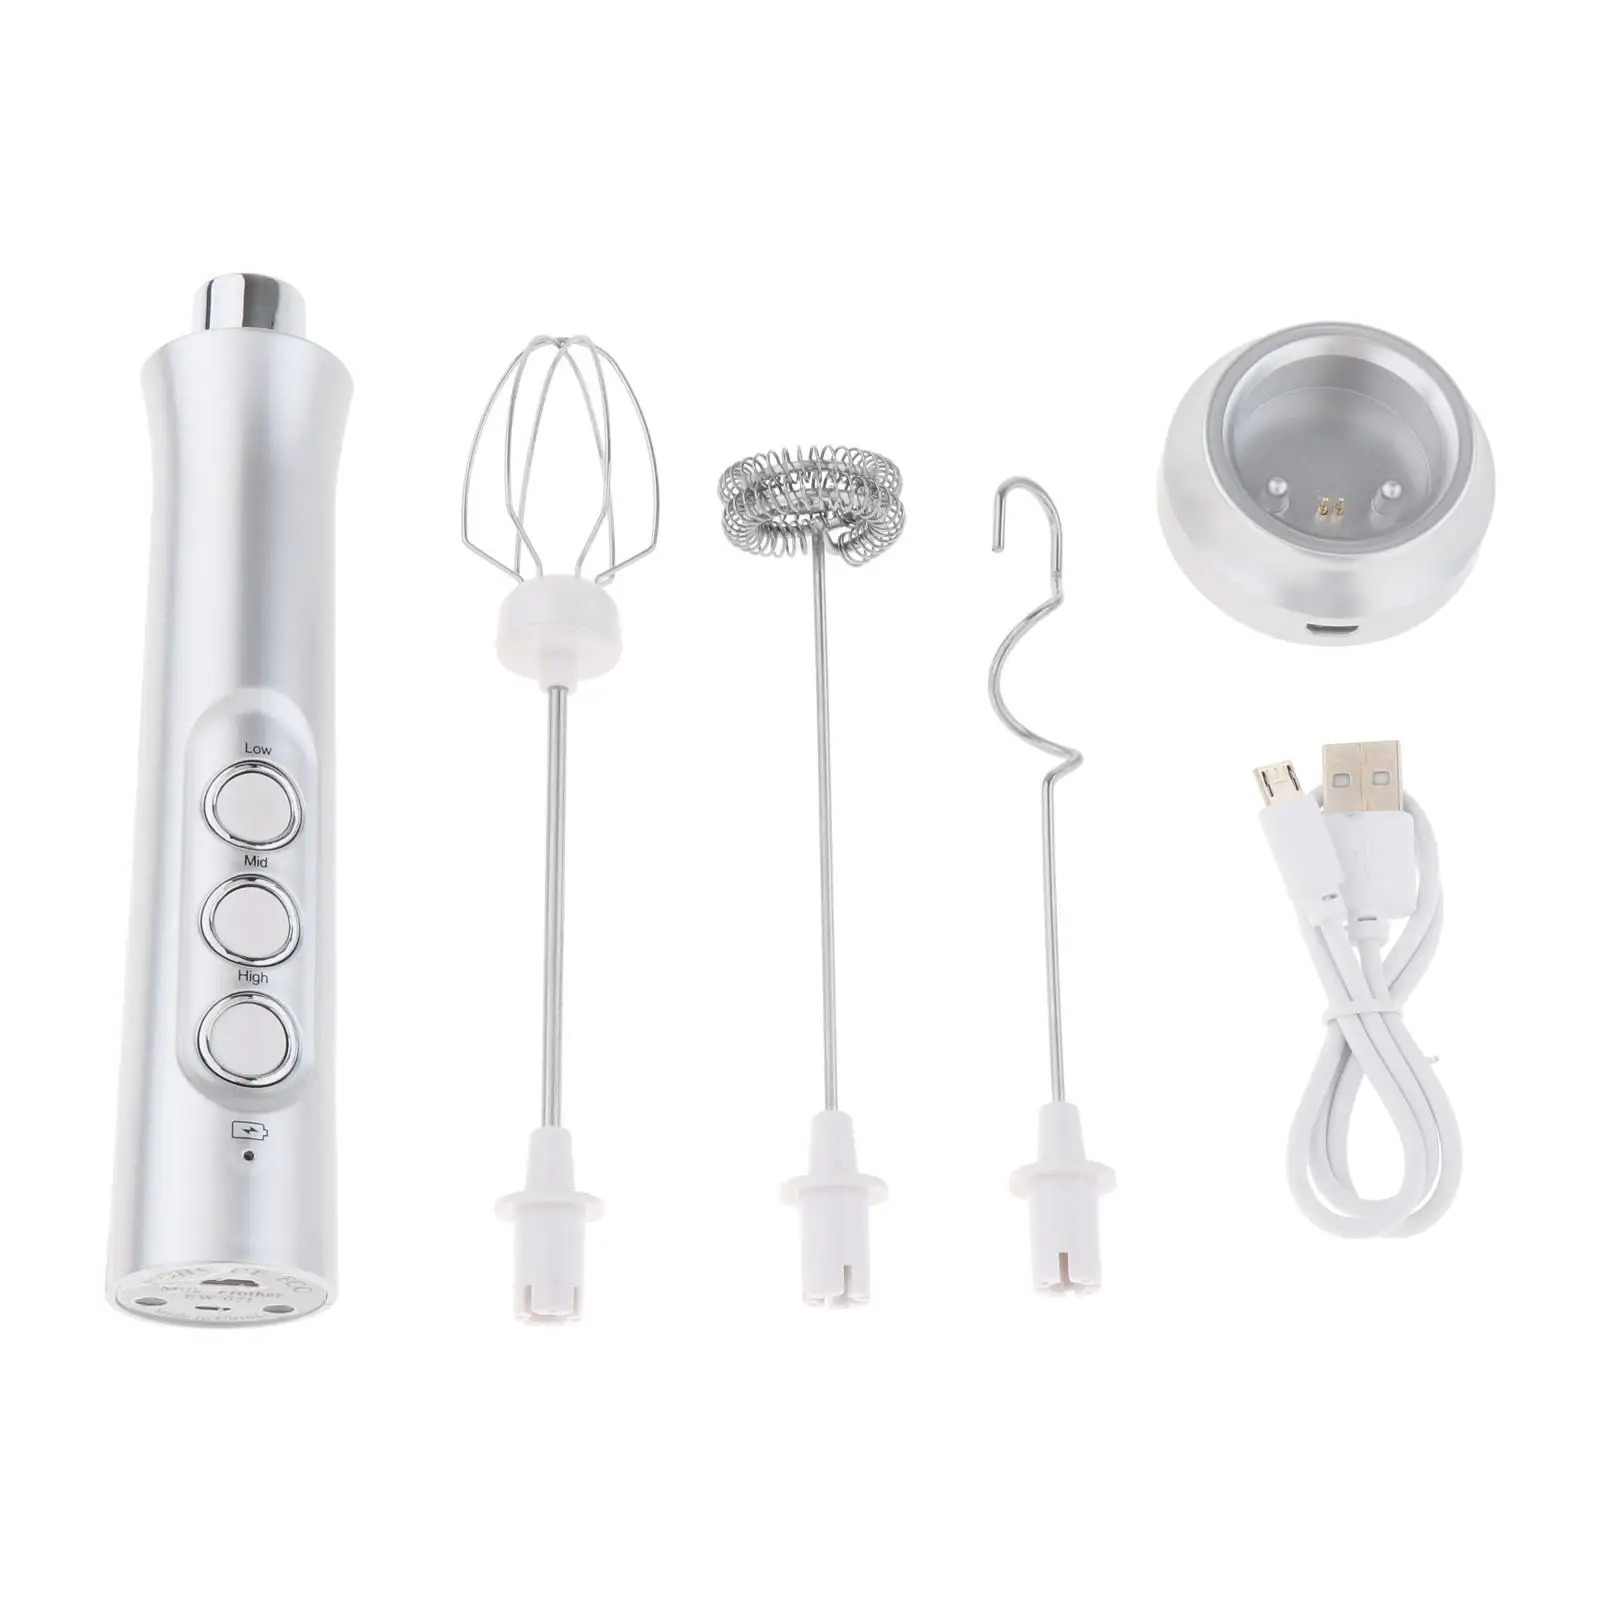 Adjustable Milk Frother 3 Heads 3 Speeds Egg Beater for Cappuccino Egg Whites Drink